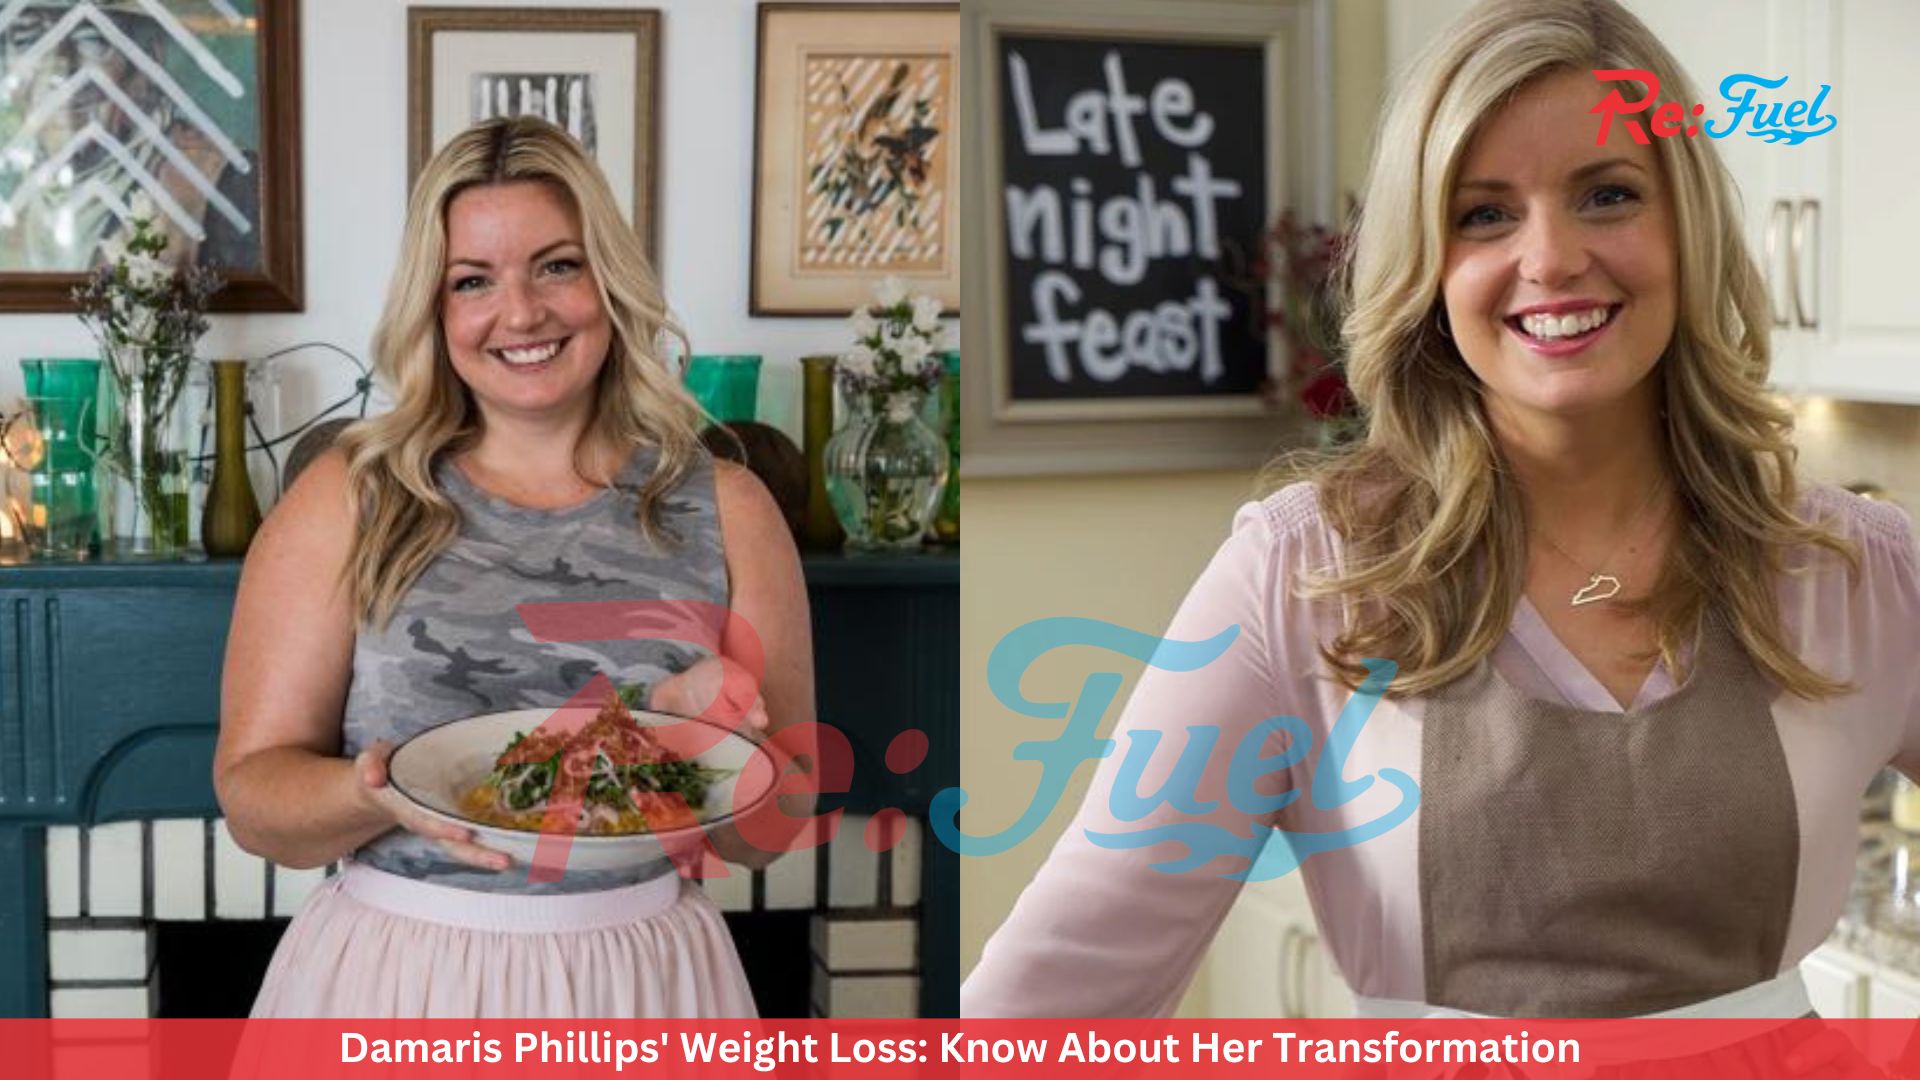 Damaris Phillips' Weight Loss: Know About Her Transformation